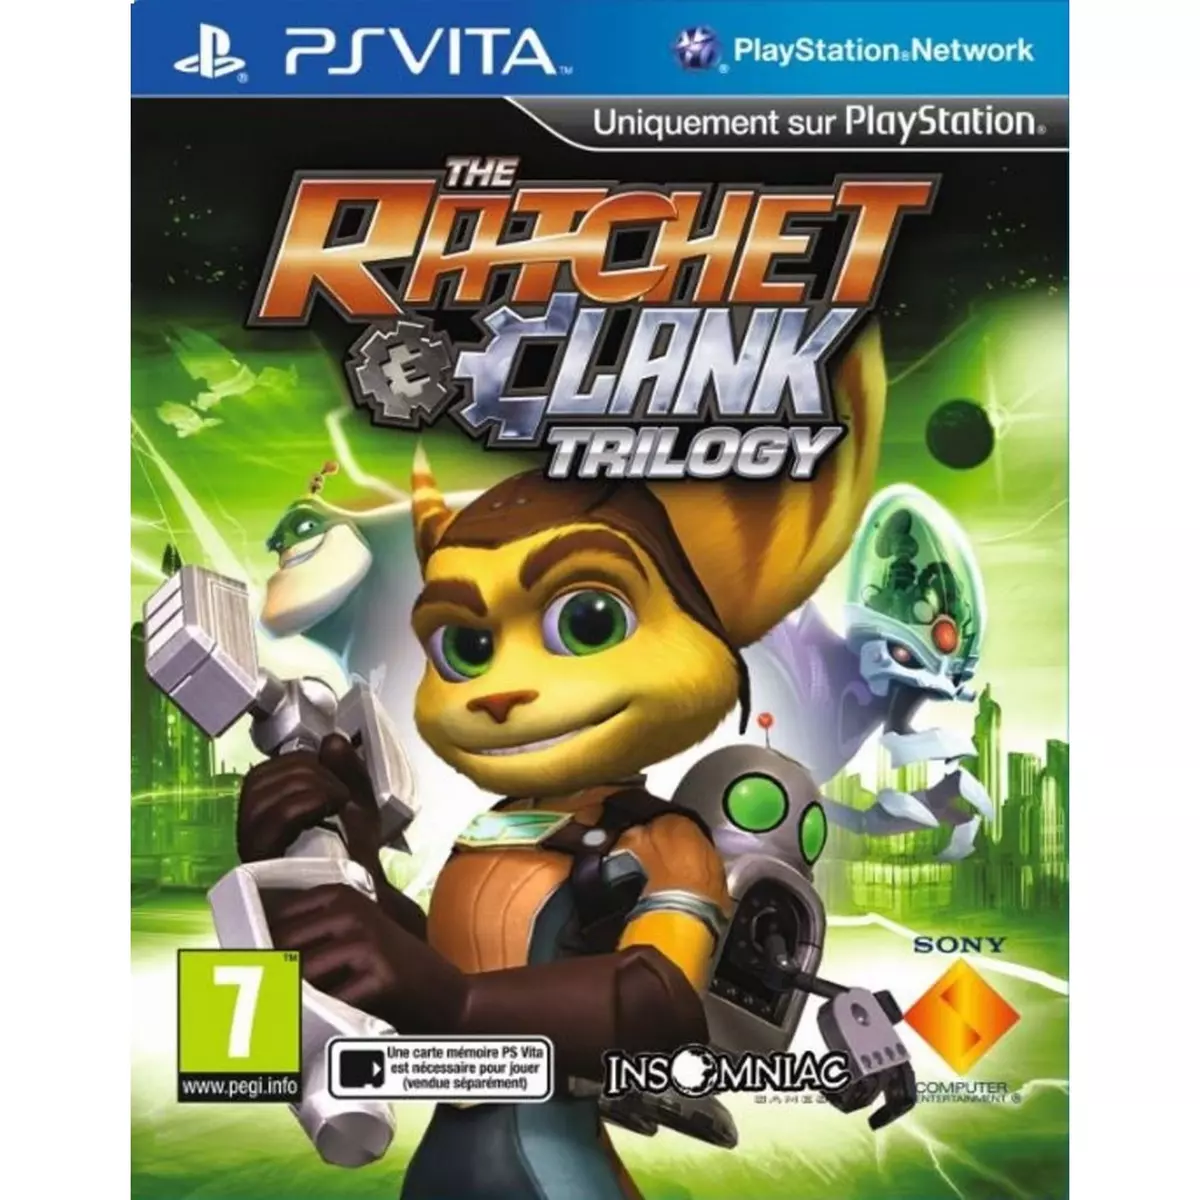 The Ratchet and Clank Trilogy